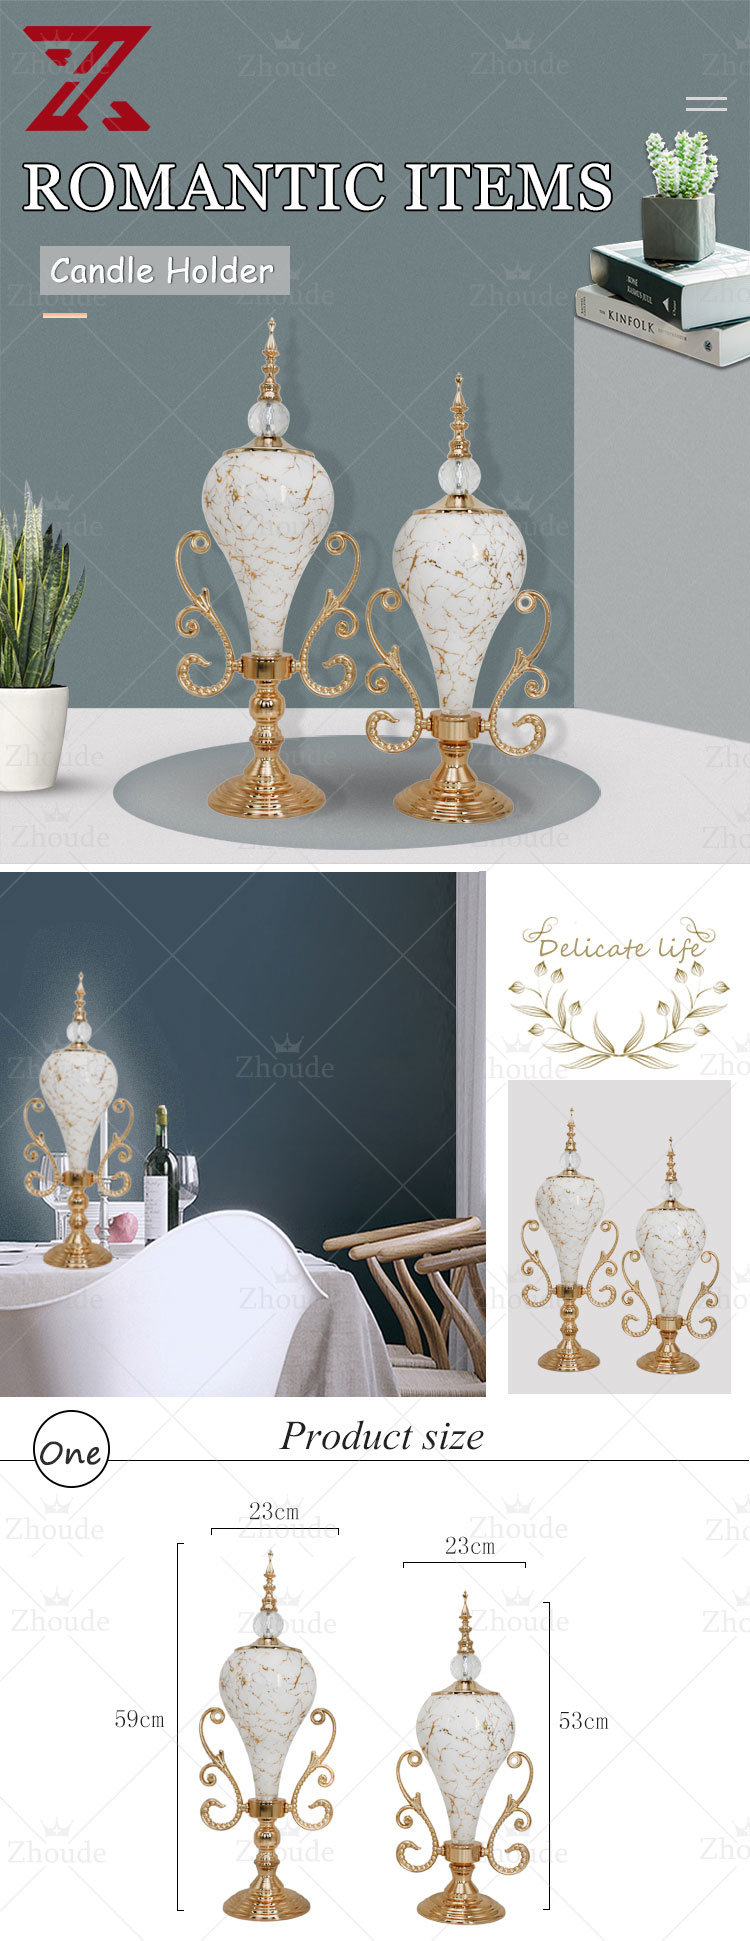 New Style European American Style Metal Golden Home Table Decoration Luxury Accessories